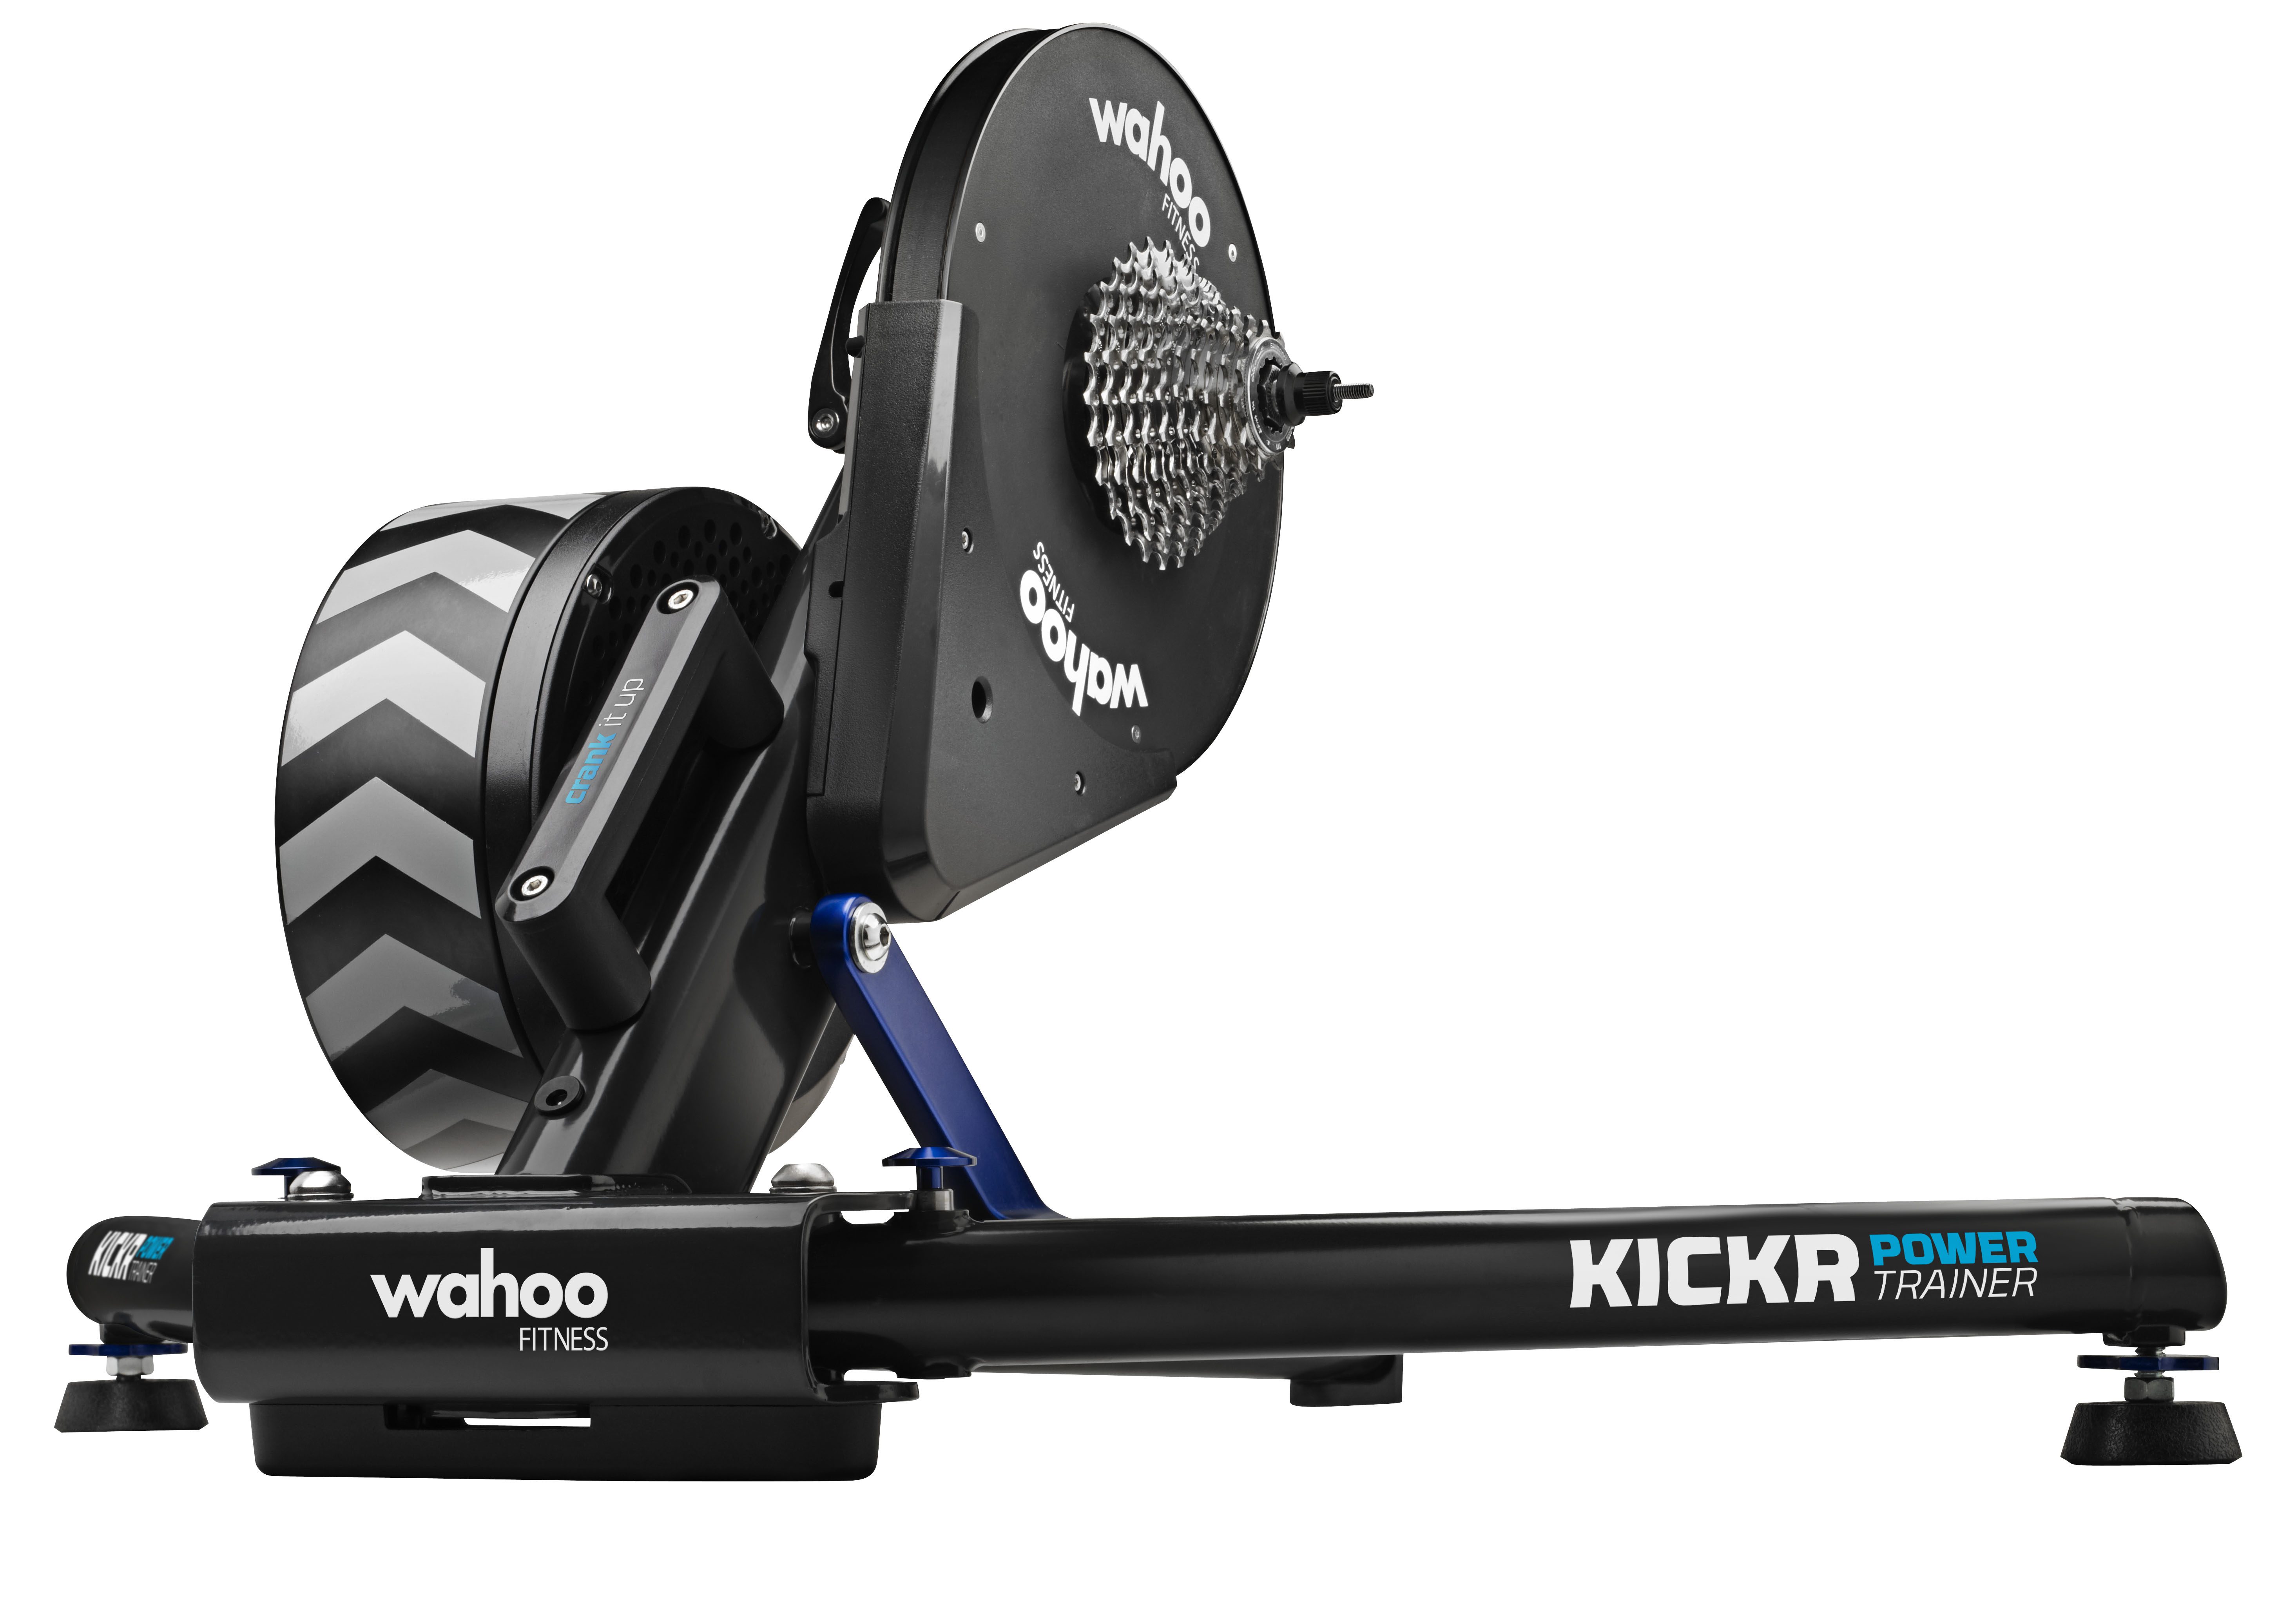 wahoo kickr trainer review